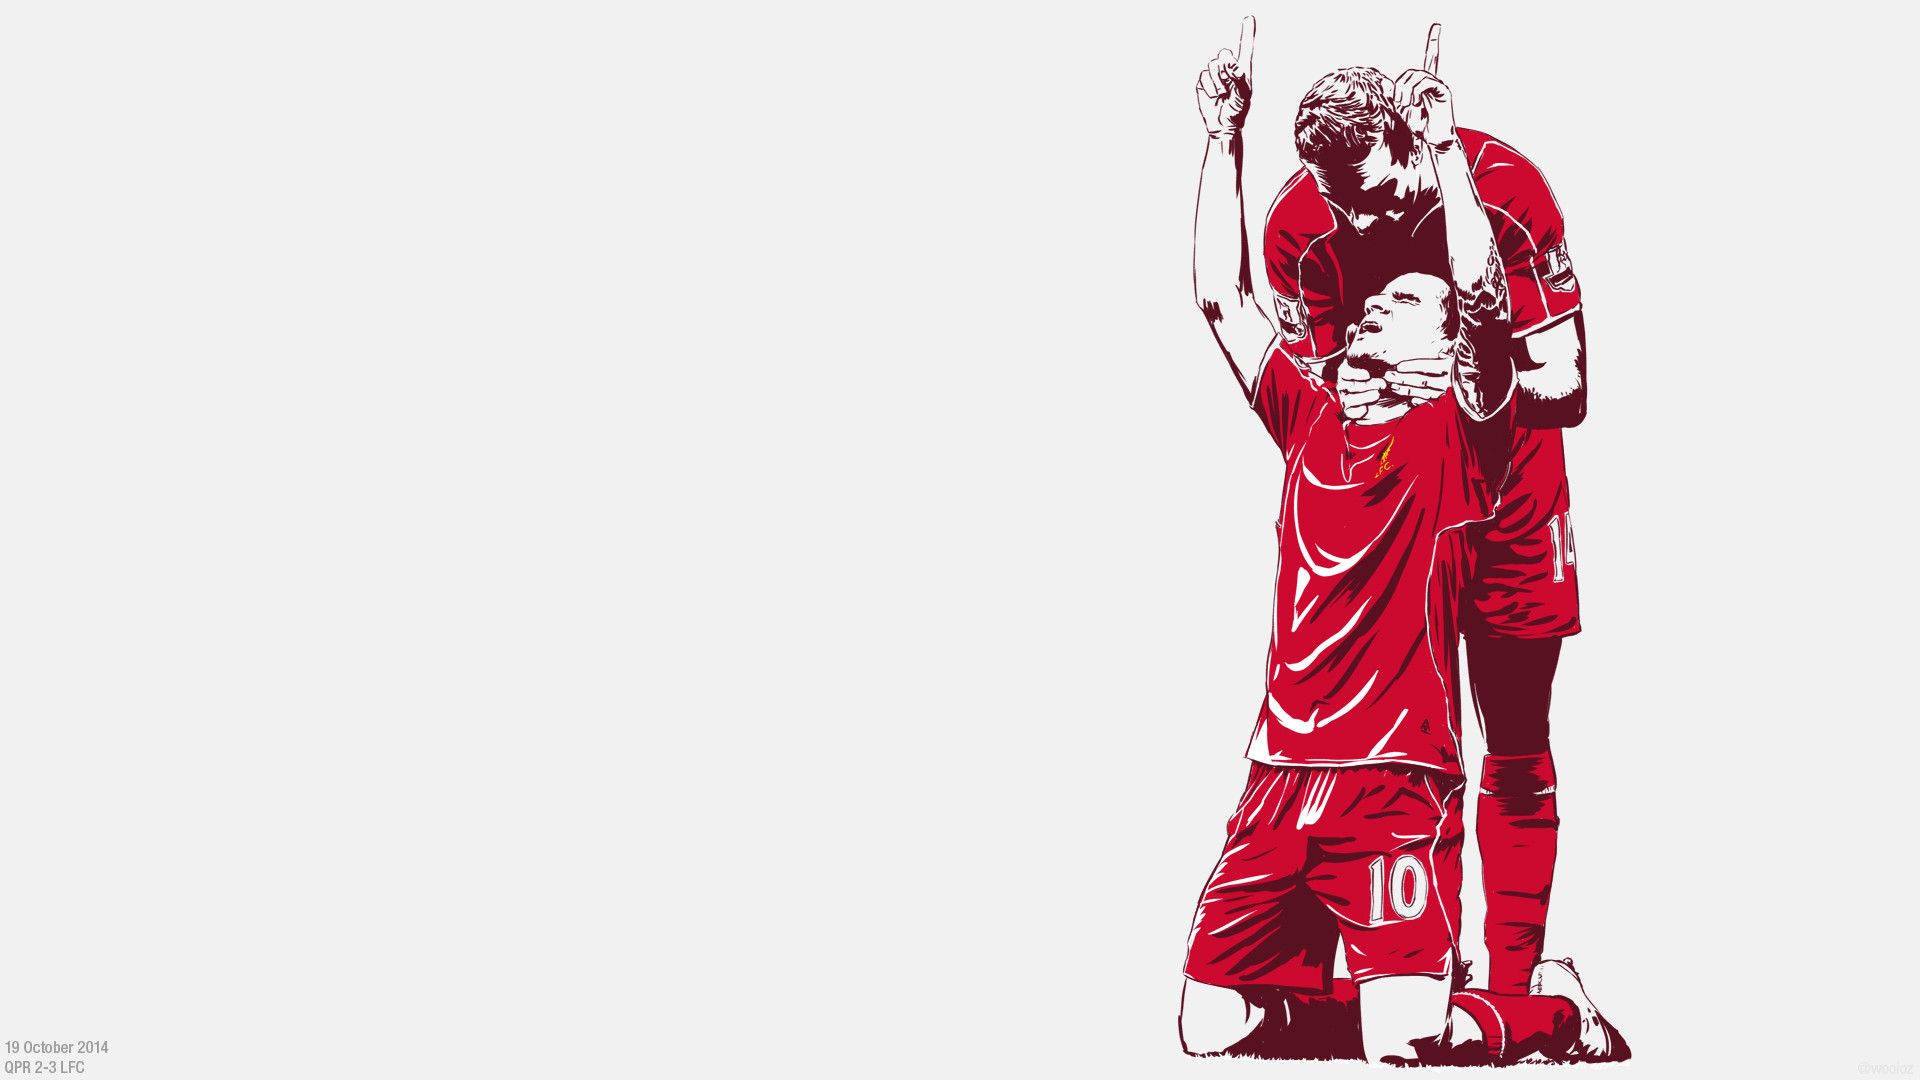 2014/15 Wallpapers project - Week 8 - Phillipe : LiverpoolFC